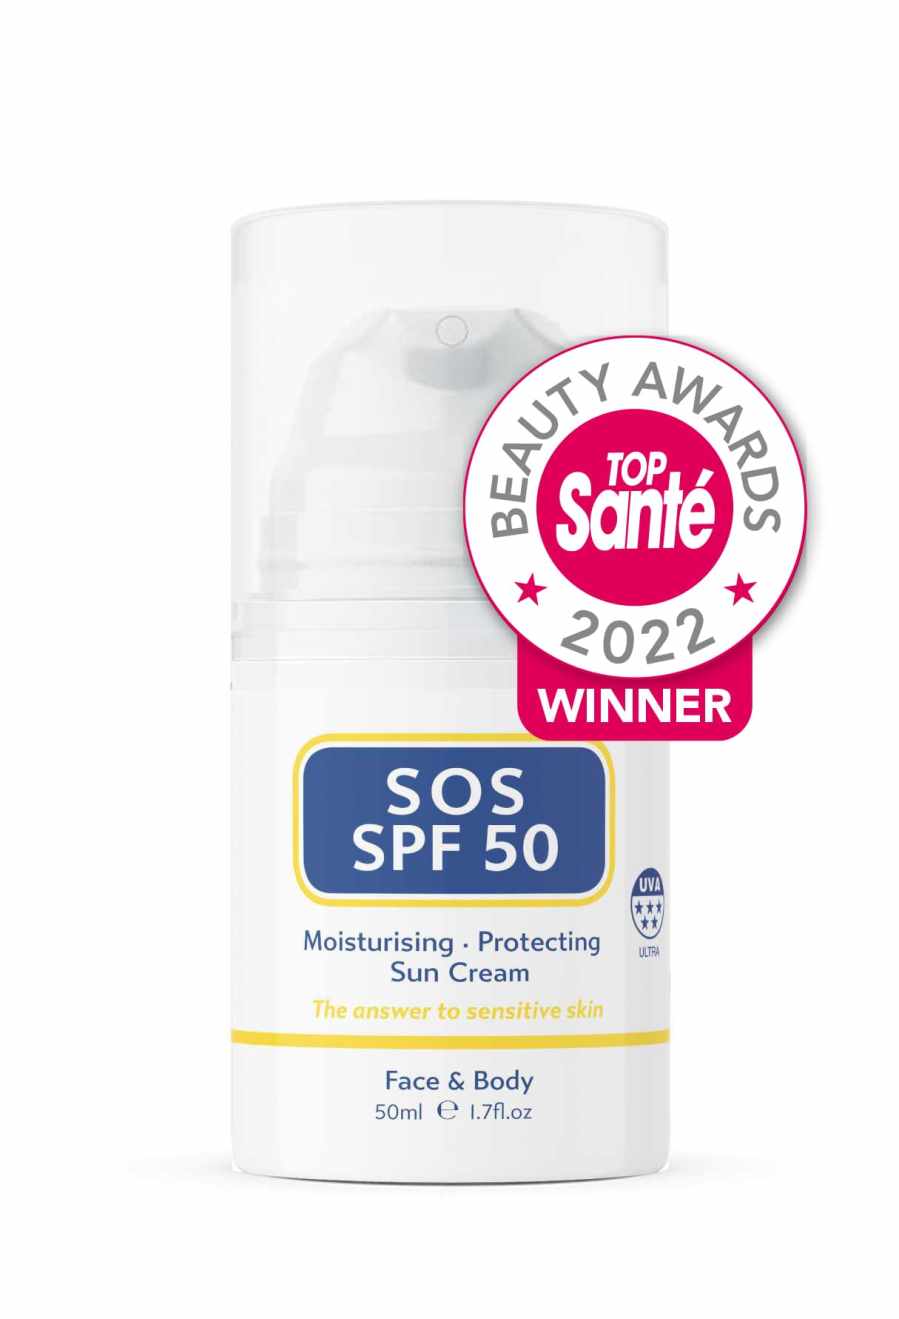 best SPF product top sante beauty awards results skincare winners